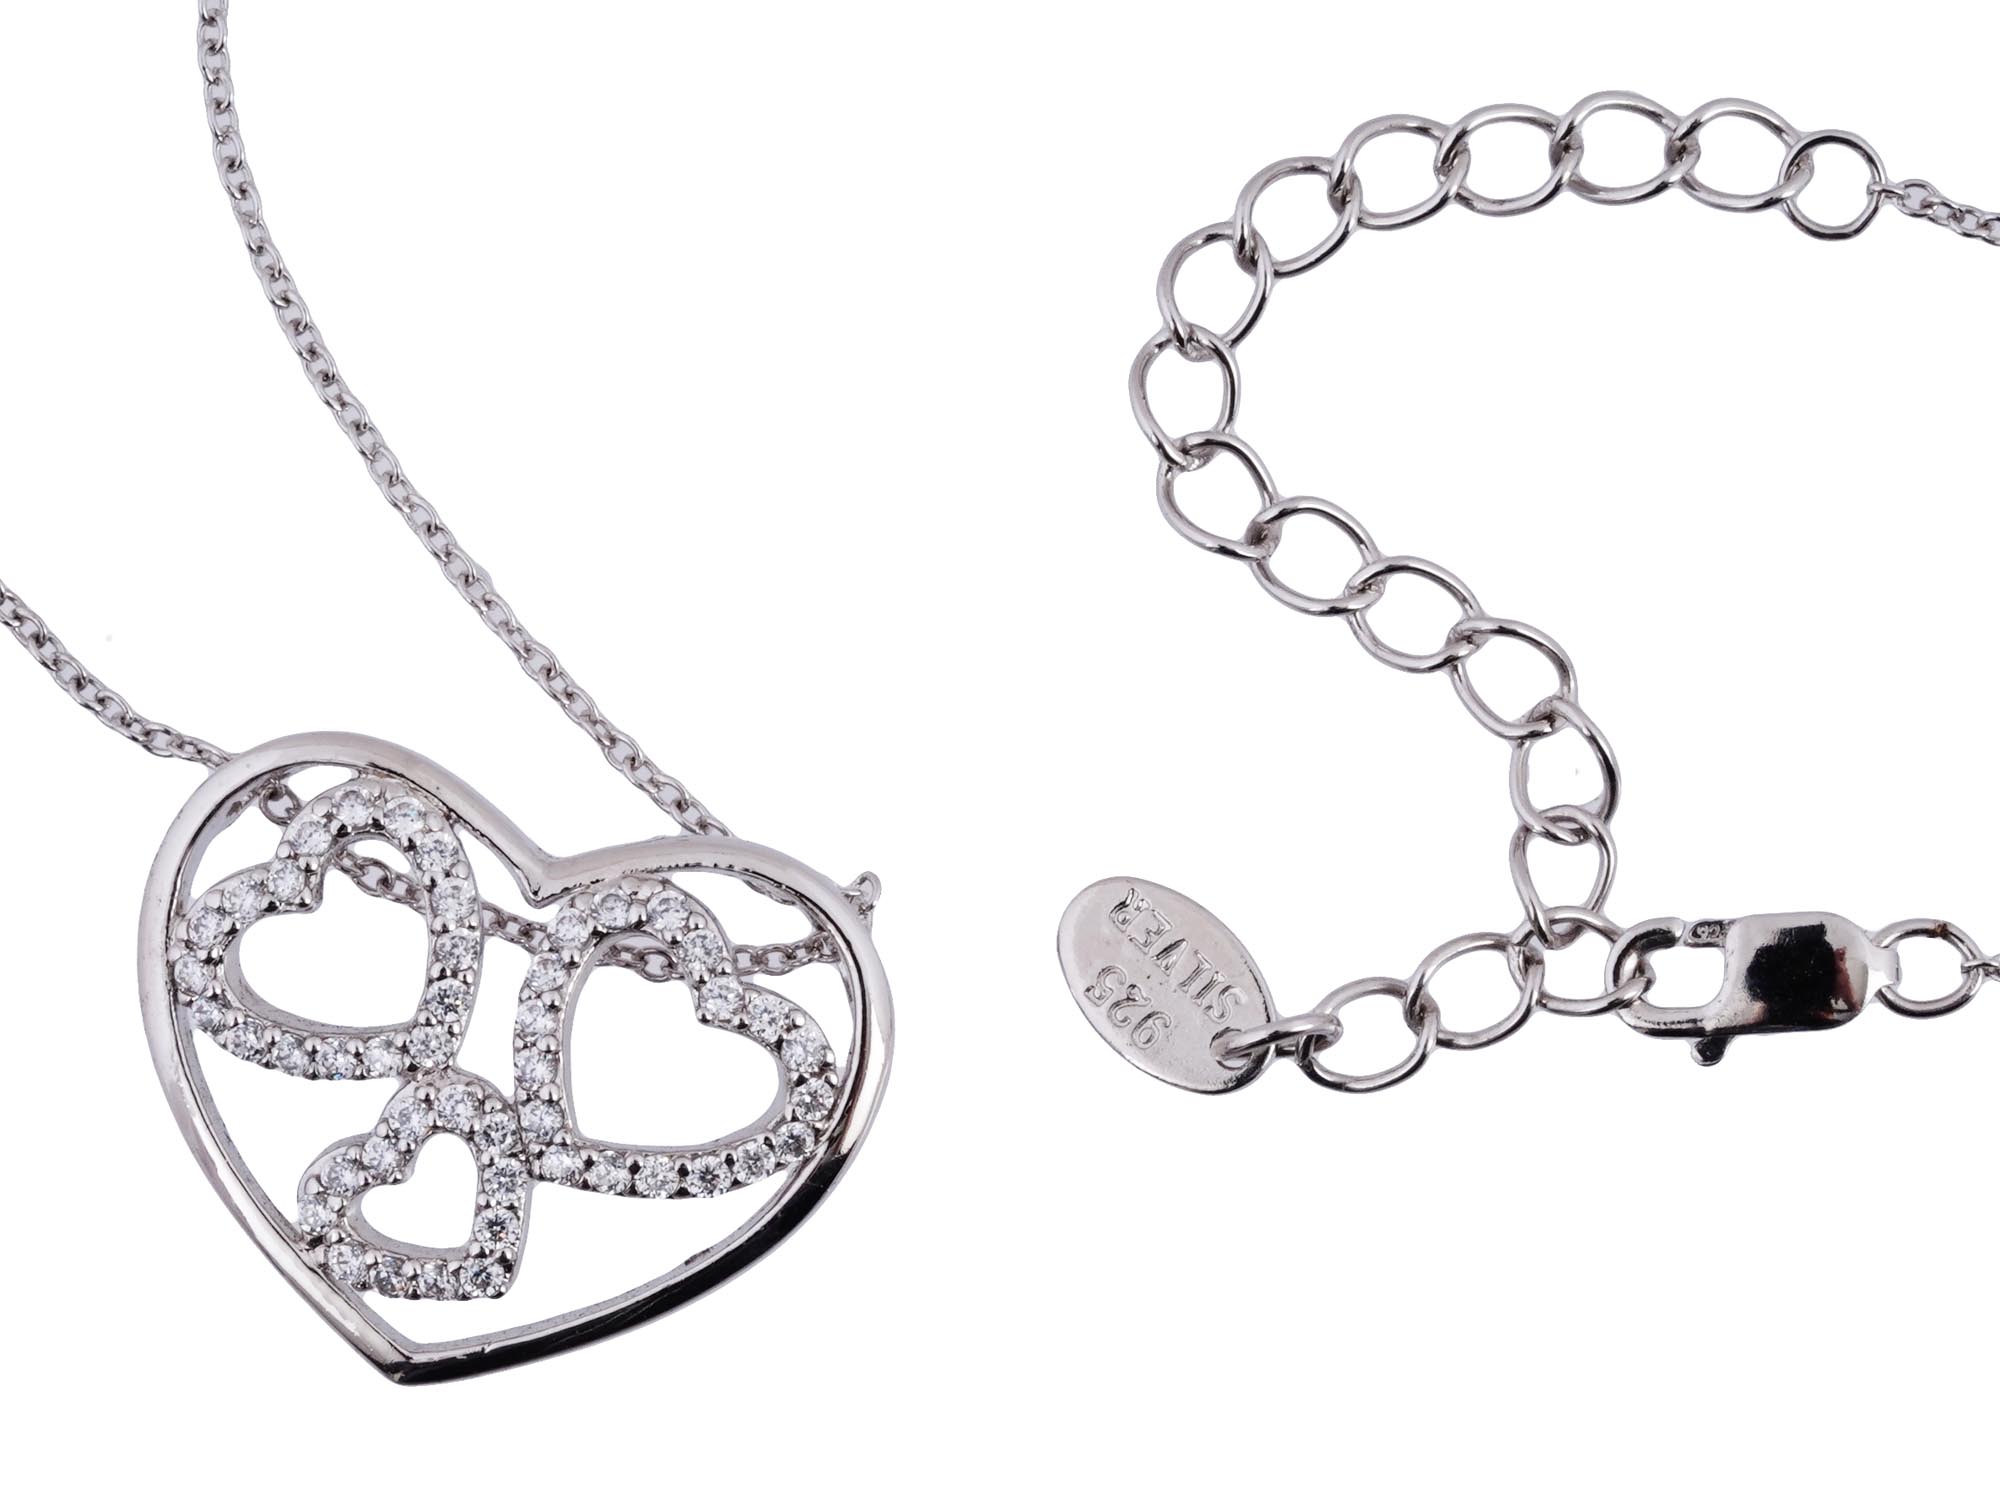 MODERN STERLING SILVER NECKLACE WITH HEART PENDANT PIC-1